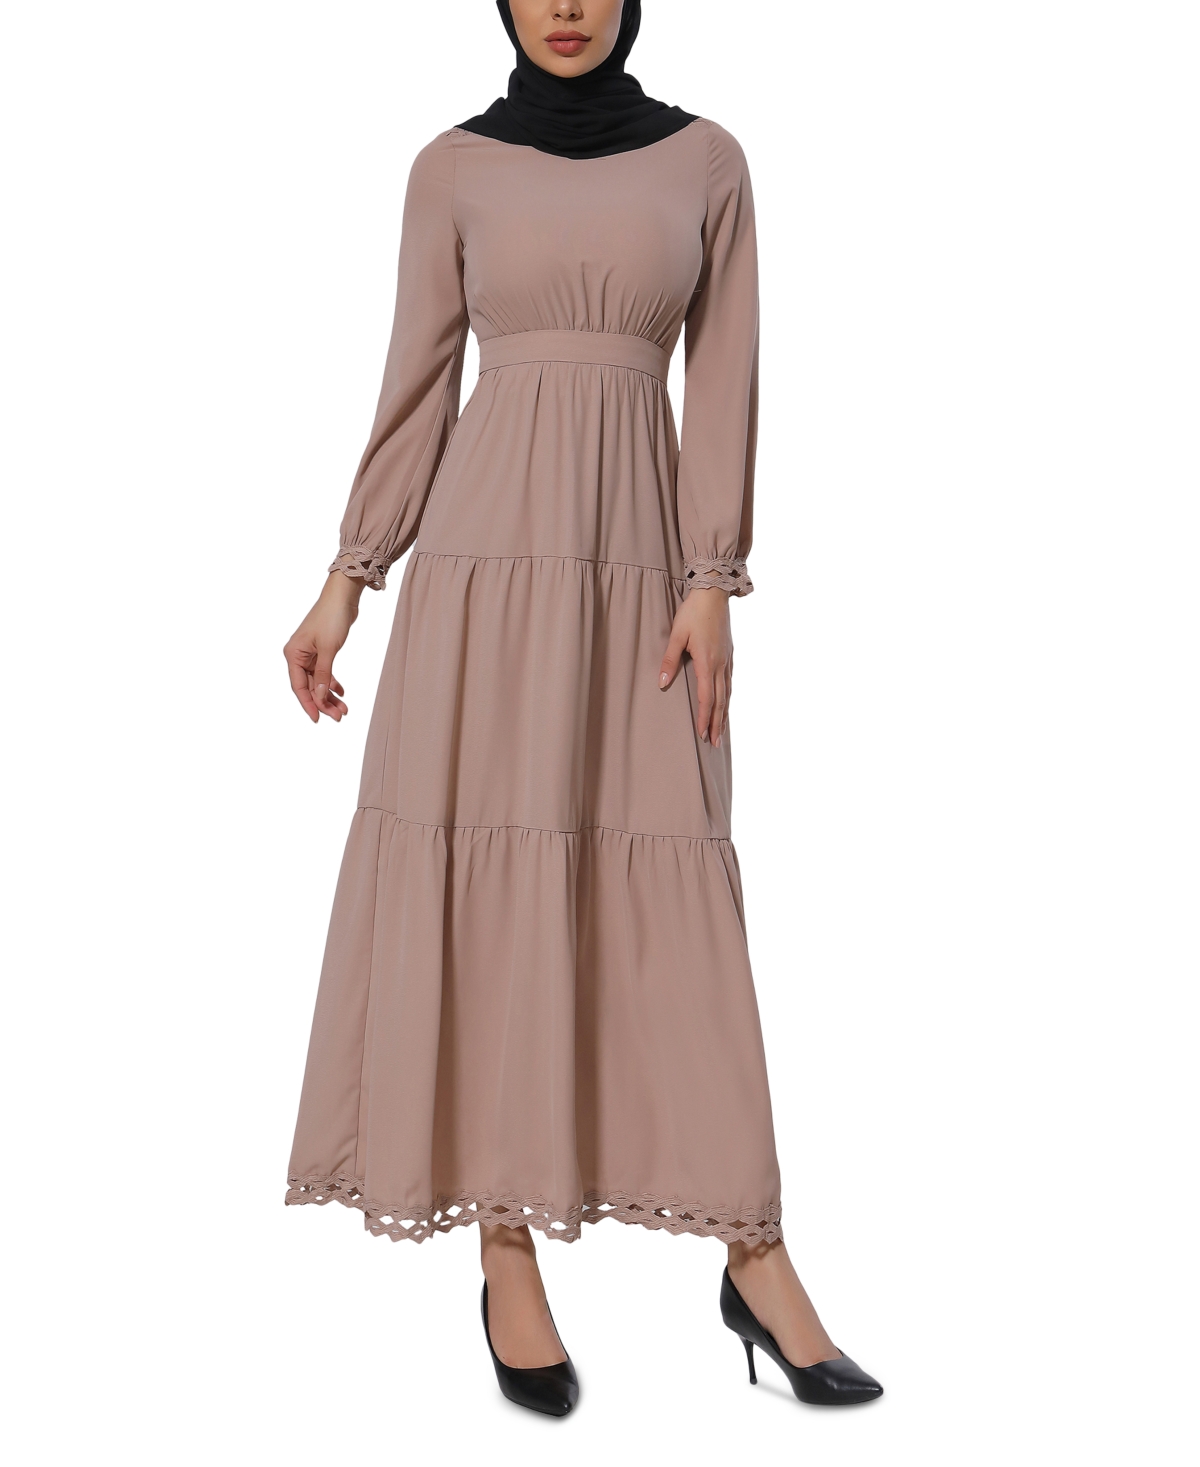 Women's Lace-Trim Tiered Maxi Dress - Taupe